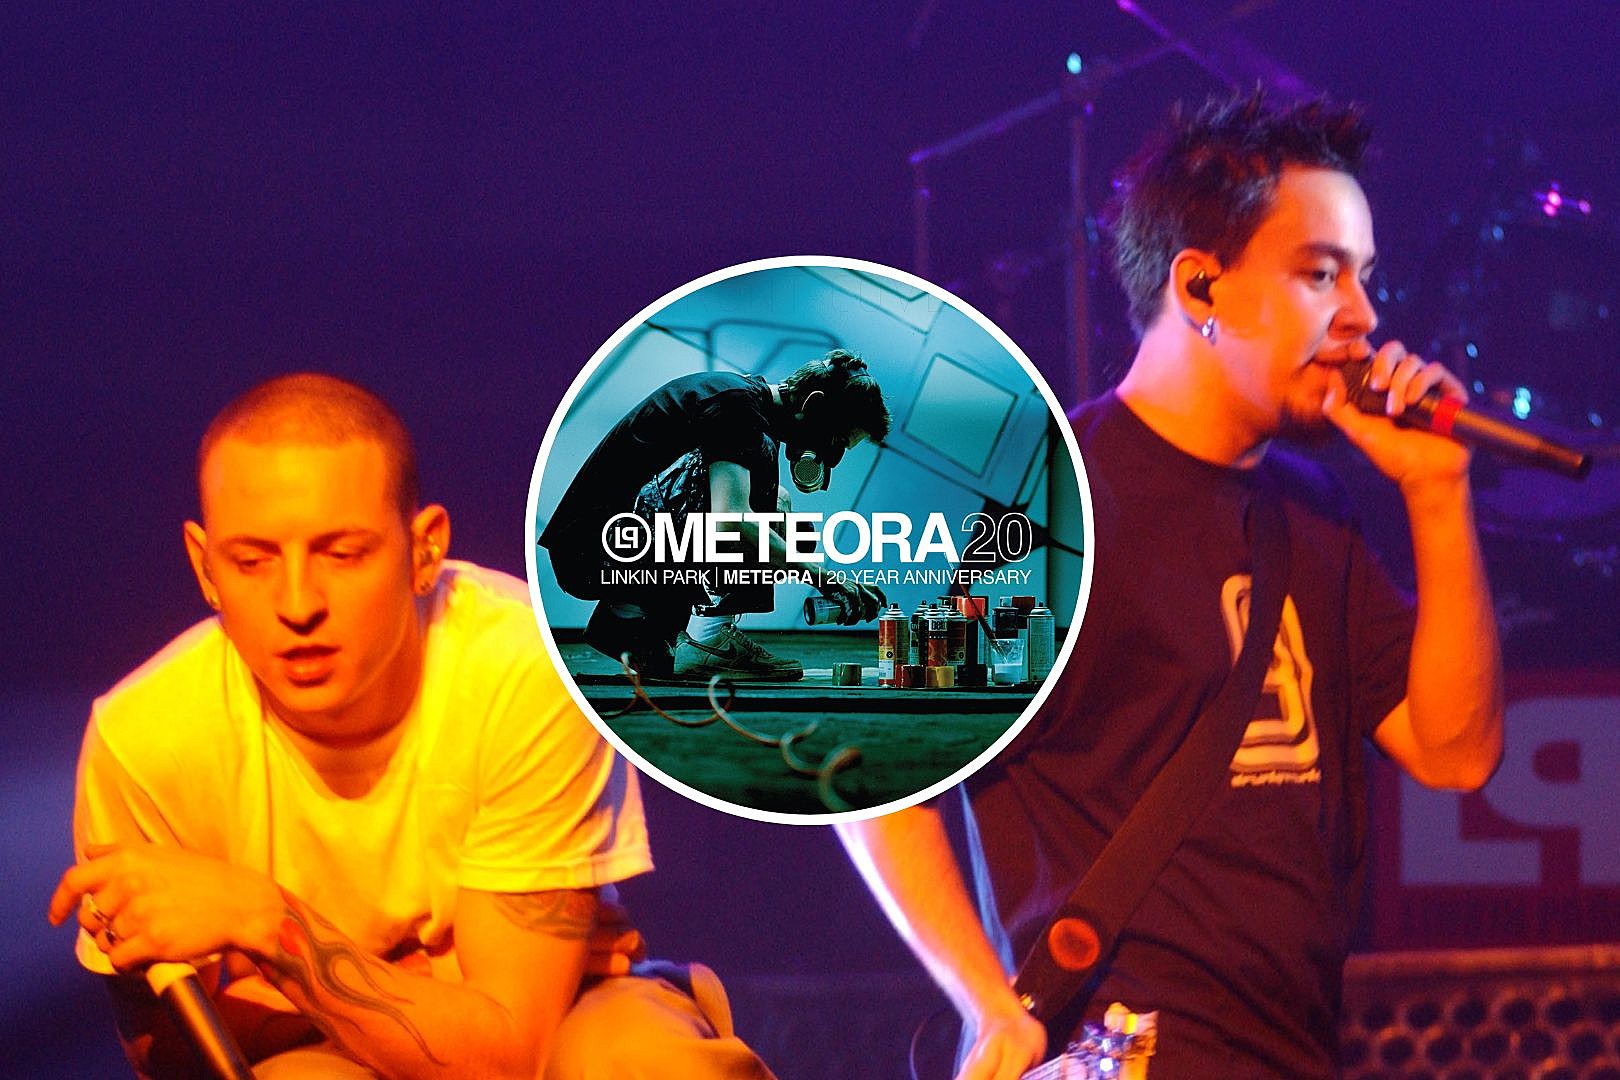 Linkin Park - Fighting Myself. From the #Meteora20 archives. Out now.  lprk.co/fightingmyself